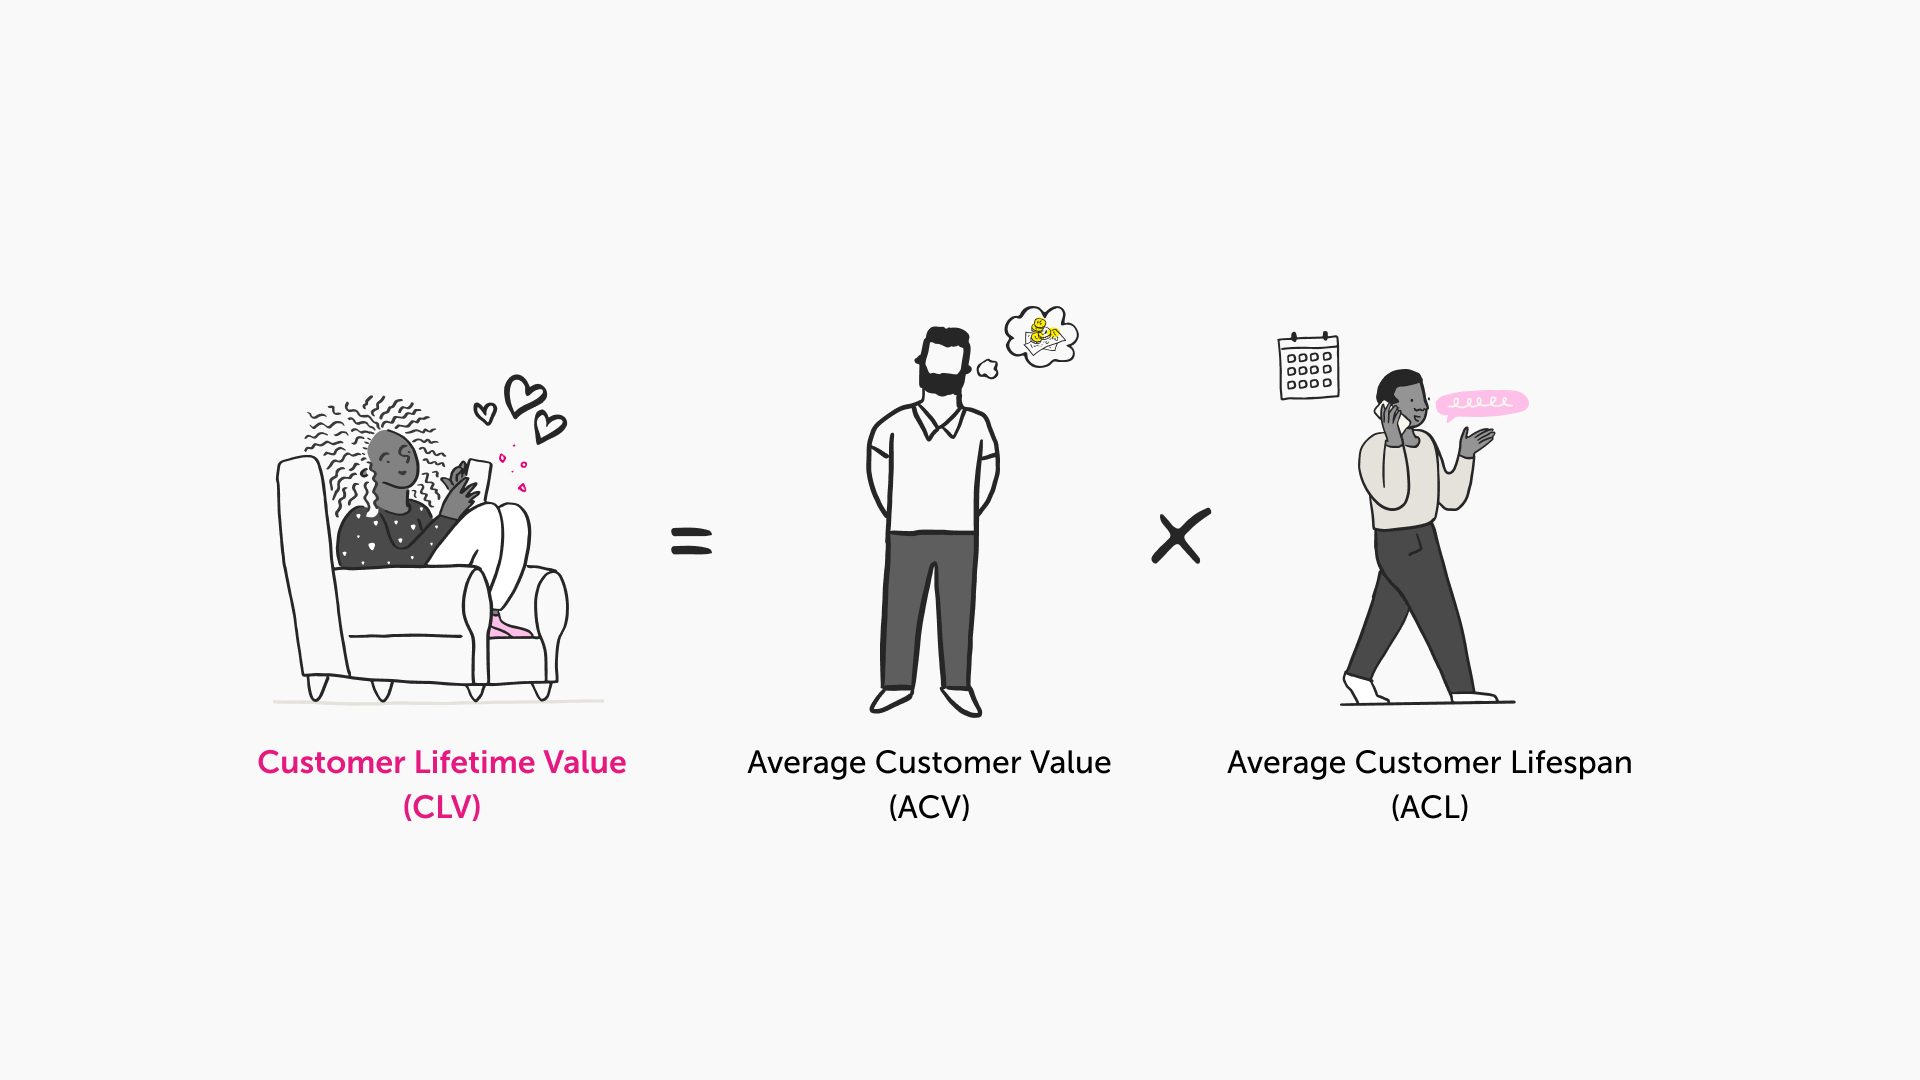 A conceptual illustration explaining the calculation of Customer Lifetime Value (CLV). On the left, a content individual is lounging in a chair, using a smartphone, with heart symbols floating above, labeled 'Customer Lifetime Value (CLV)'. In the center, a man stands thinking about a coin, representing 'Average Customer Value (ACV)'. On the right, a person is walking and talking on a mobile phone beside a calendar, symbolizing 'Average Customer Lifespan (ACL)'. The equation 'CLV equals ACV times ACL' is visually represented by these three scenarios.